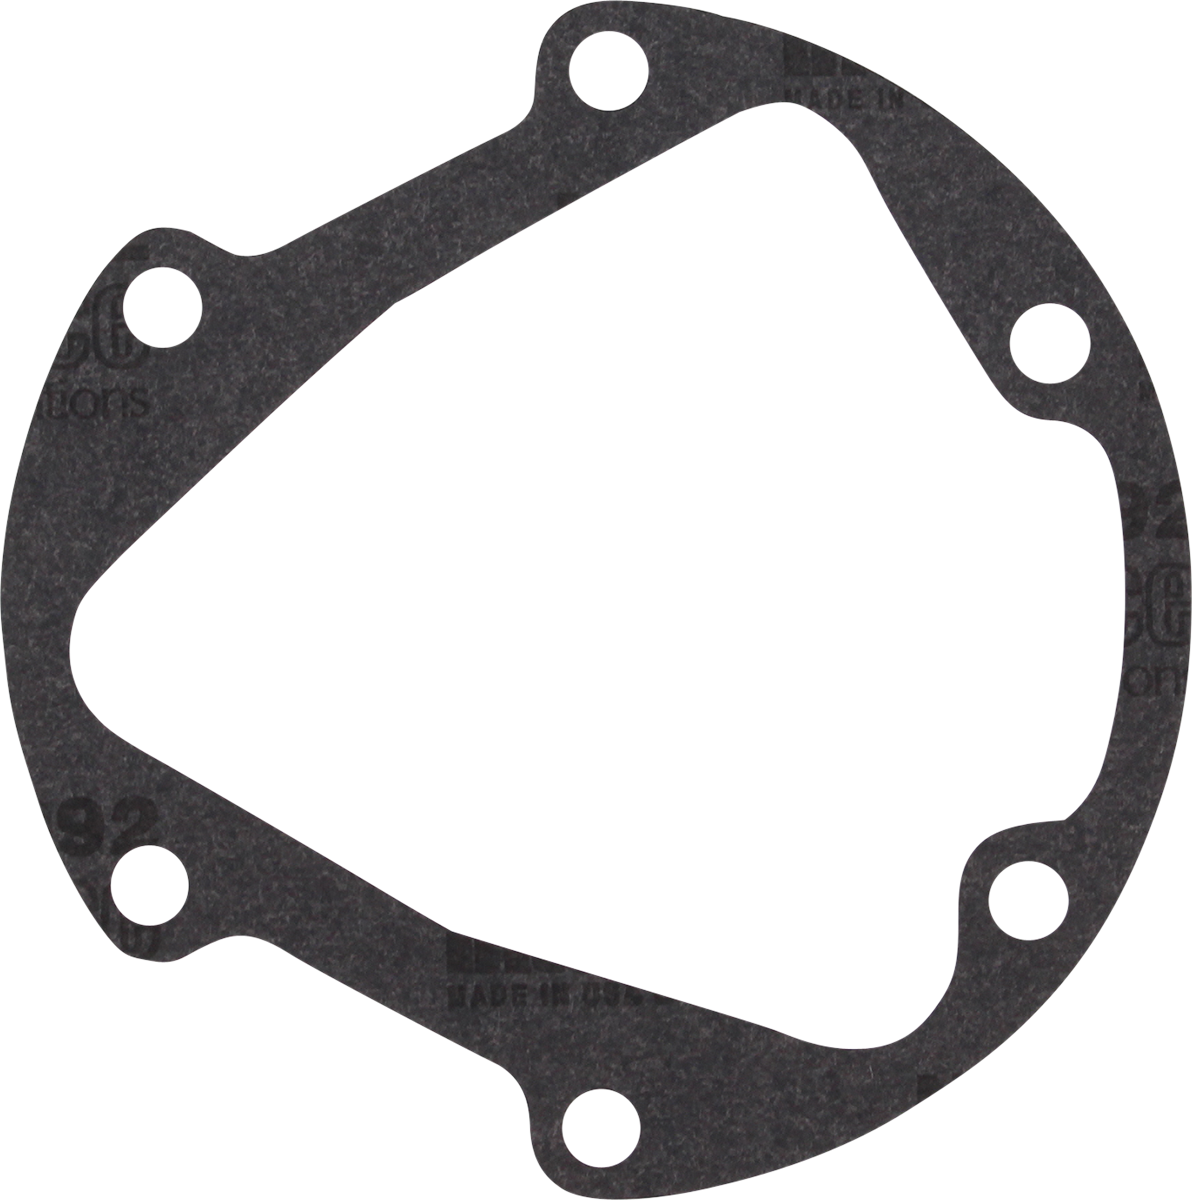 MOOSE RACING HARD-PARTS - GASKET CLUTCH COVER KAW